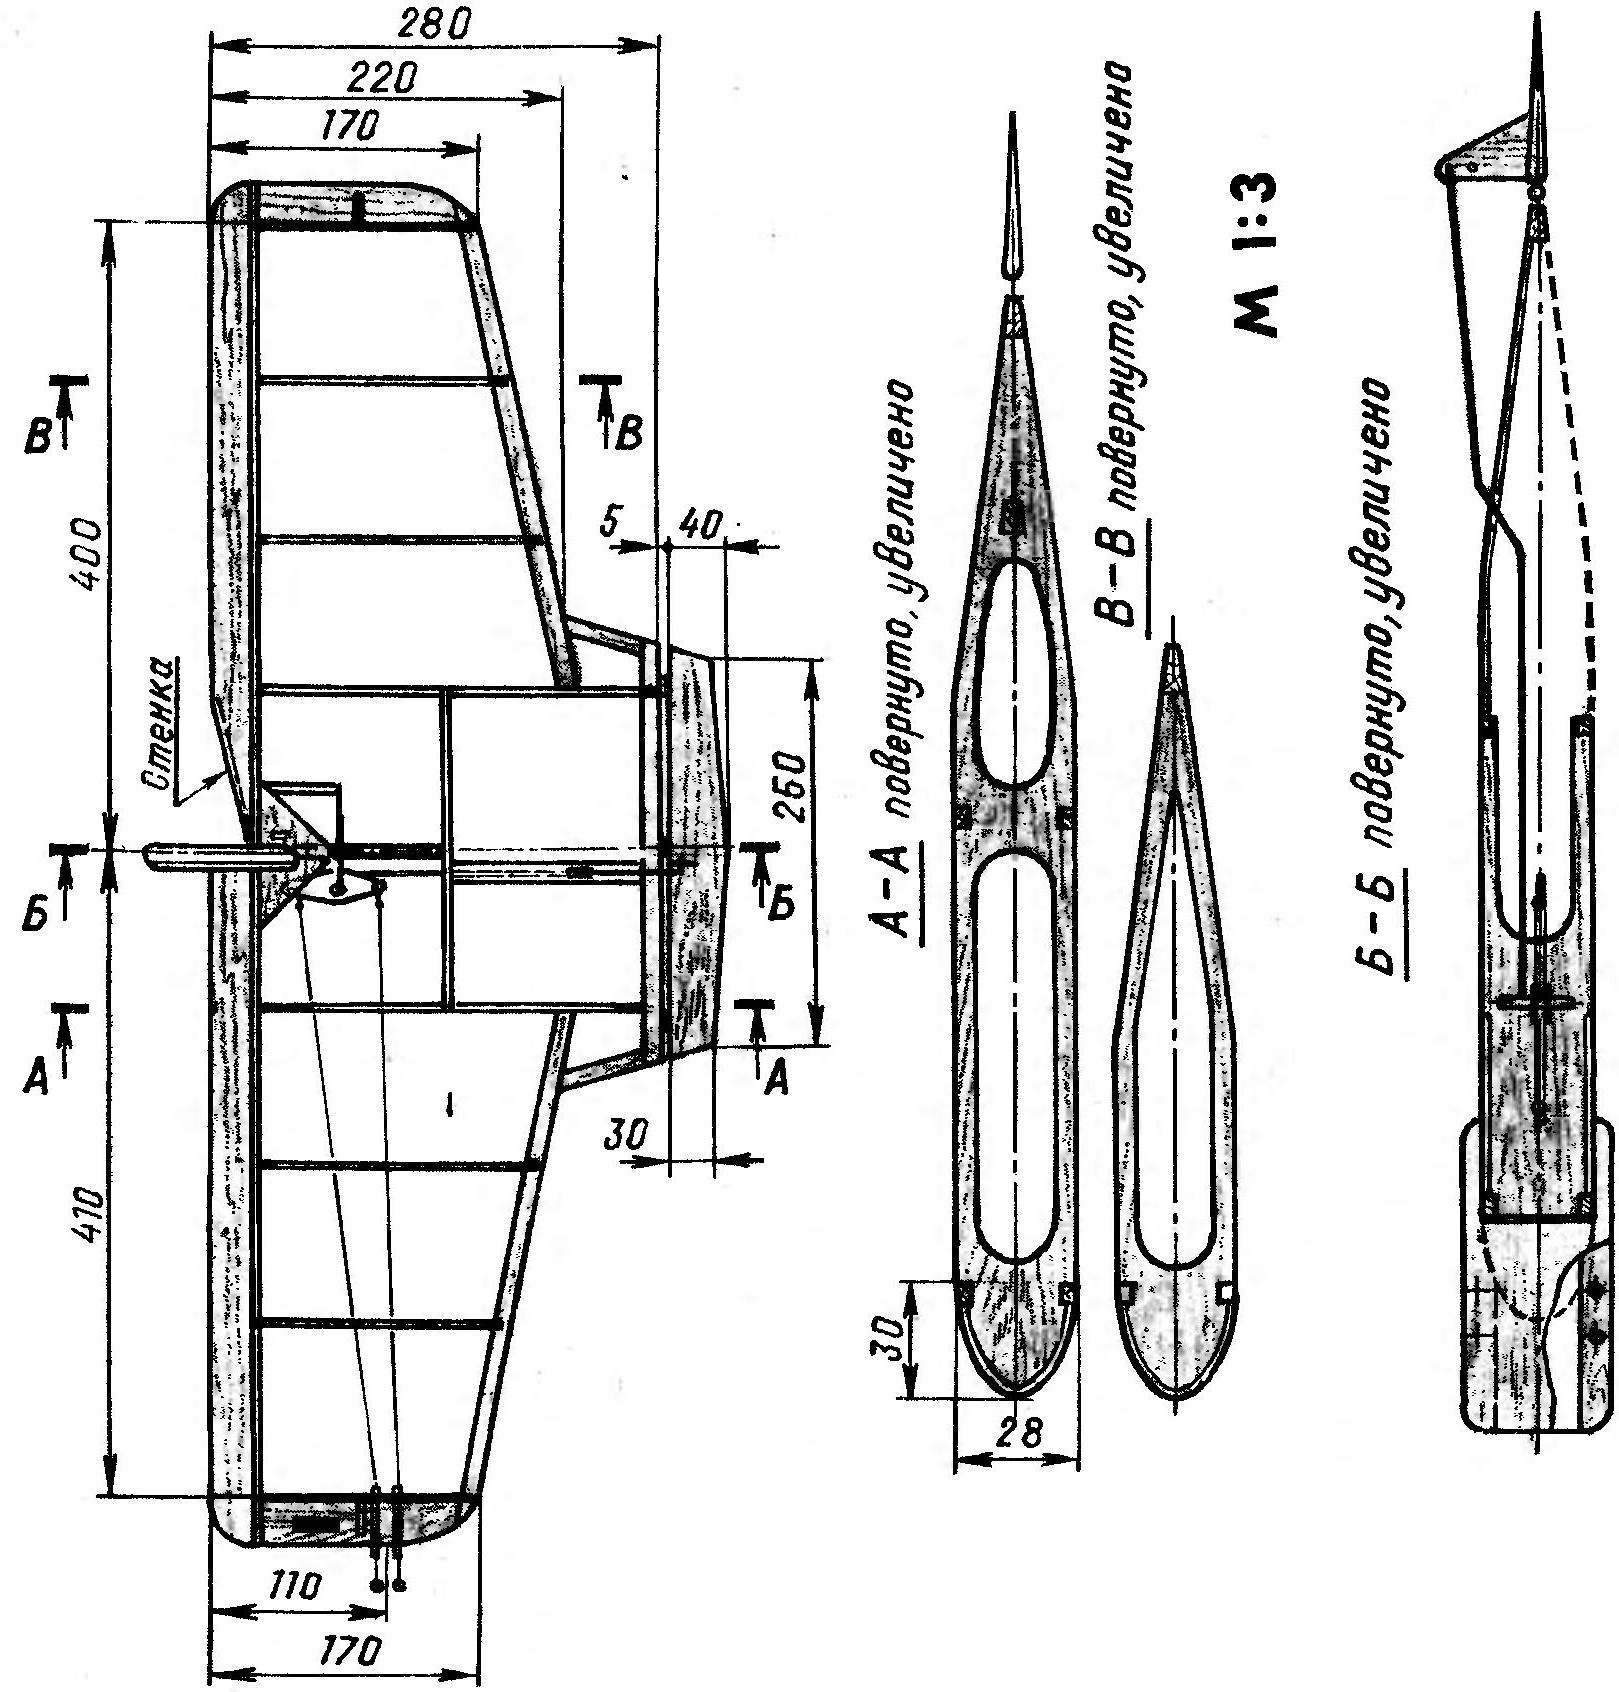  R and S. 1. Model of 